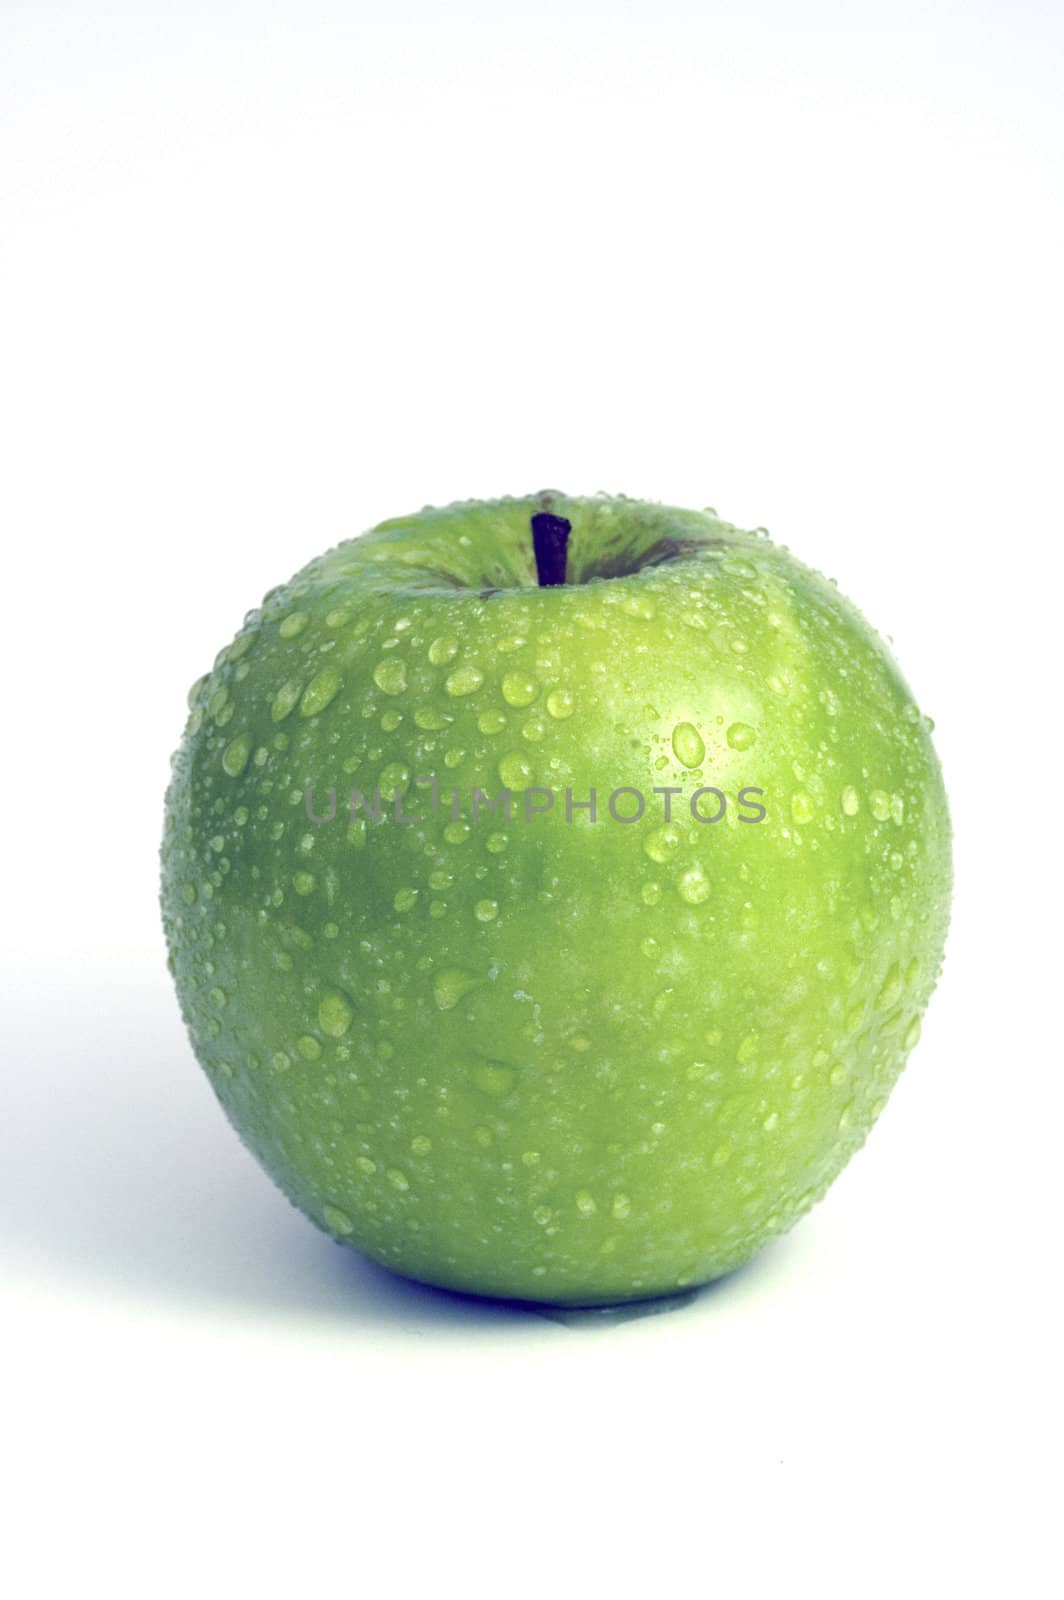 Granny Smith Apple with water mist and droplets on white background